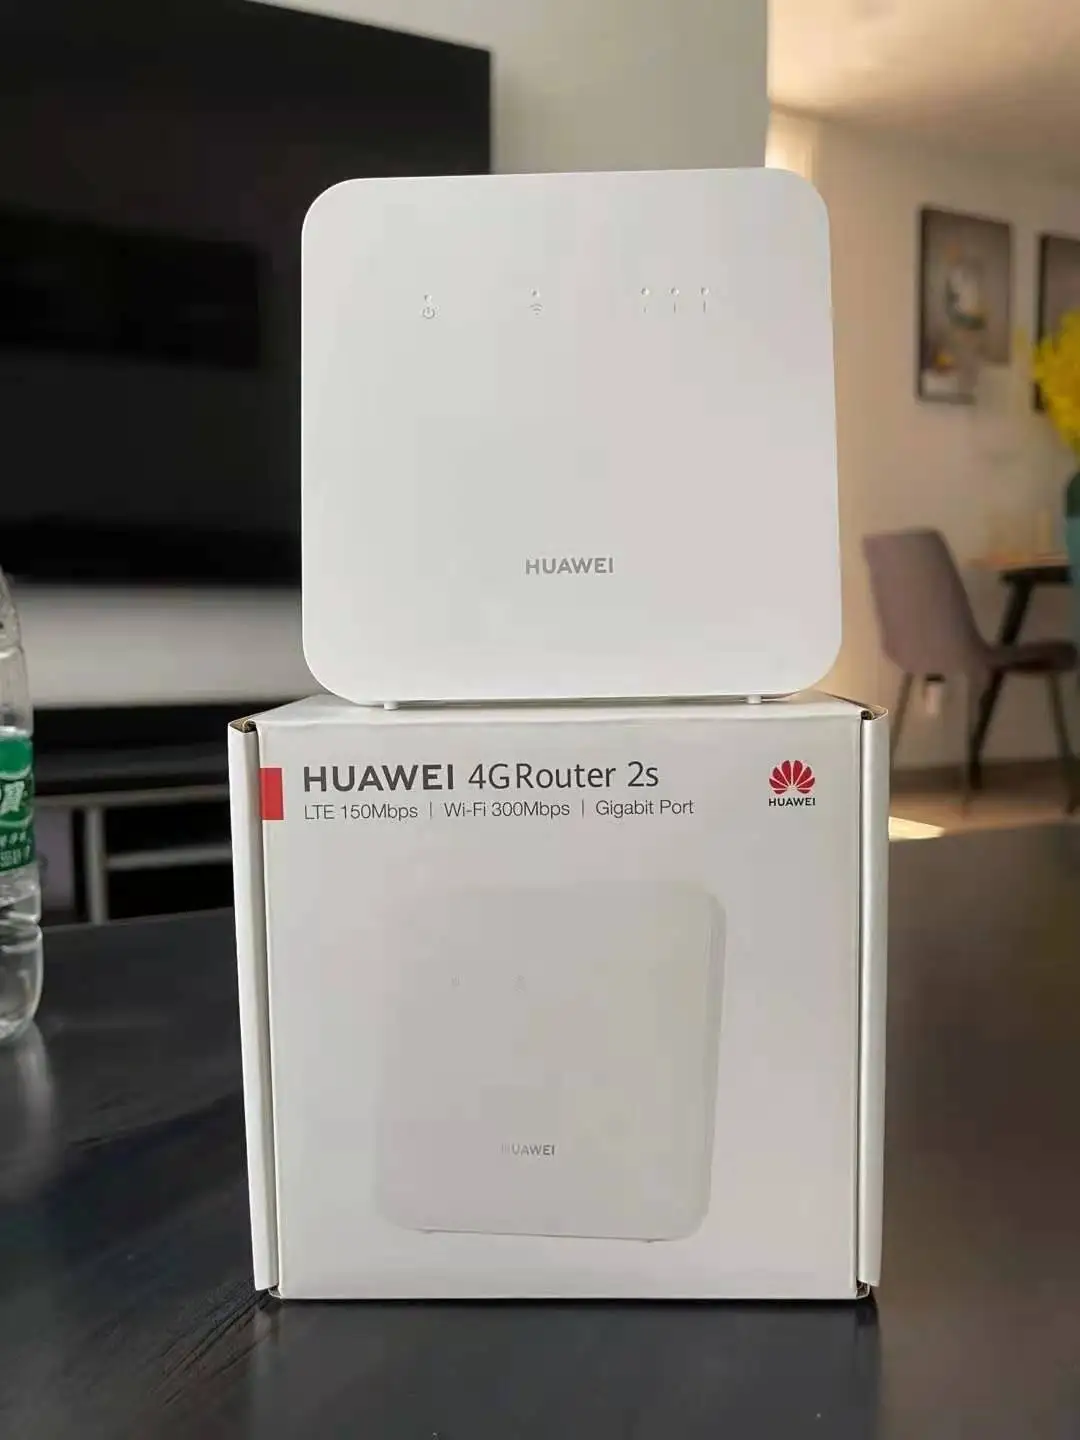 

HUAWEI 4G CPE router 2s B312-926 Support VPN Multi-language 300 Mbps LTE 150 Mbps